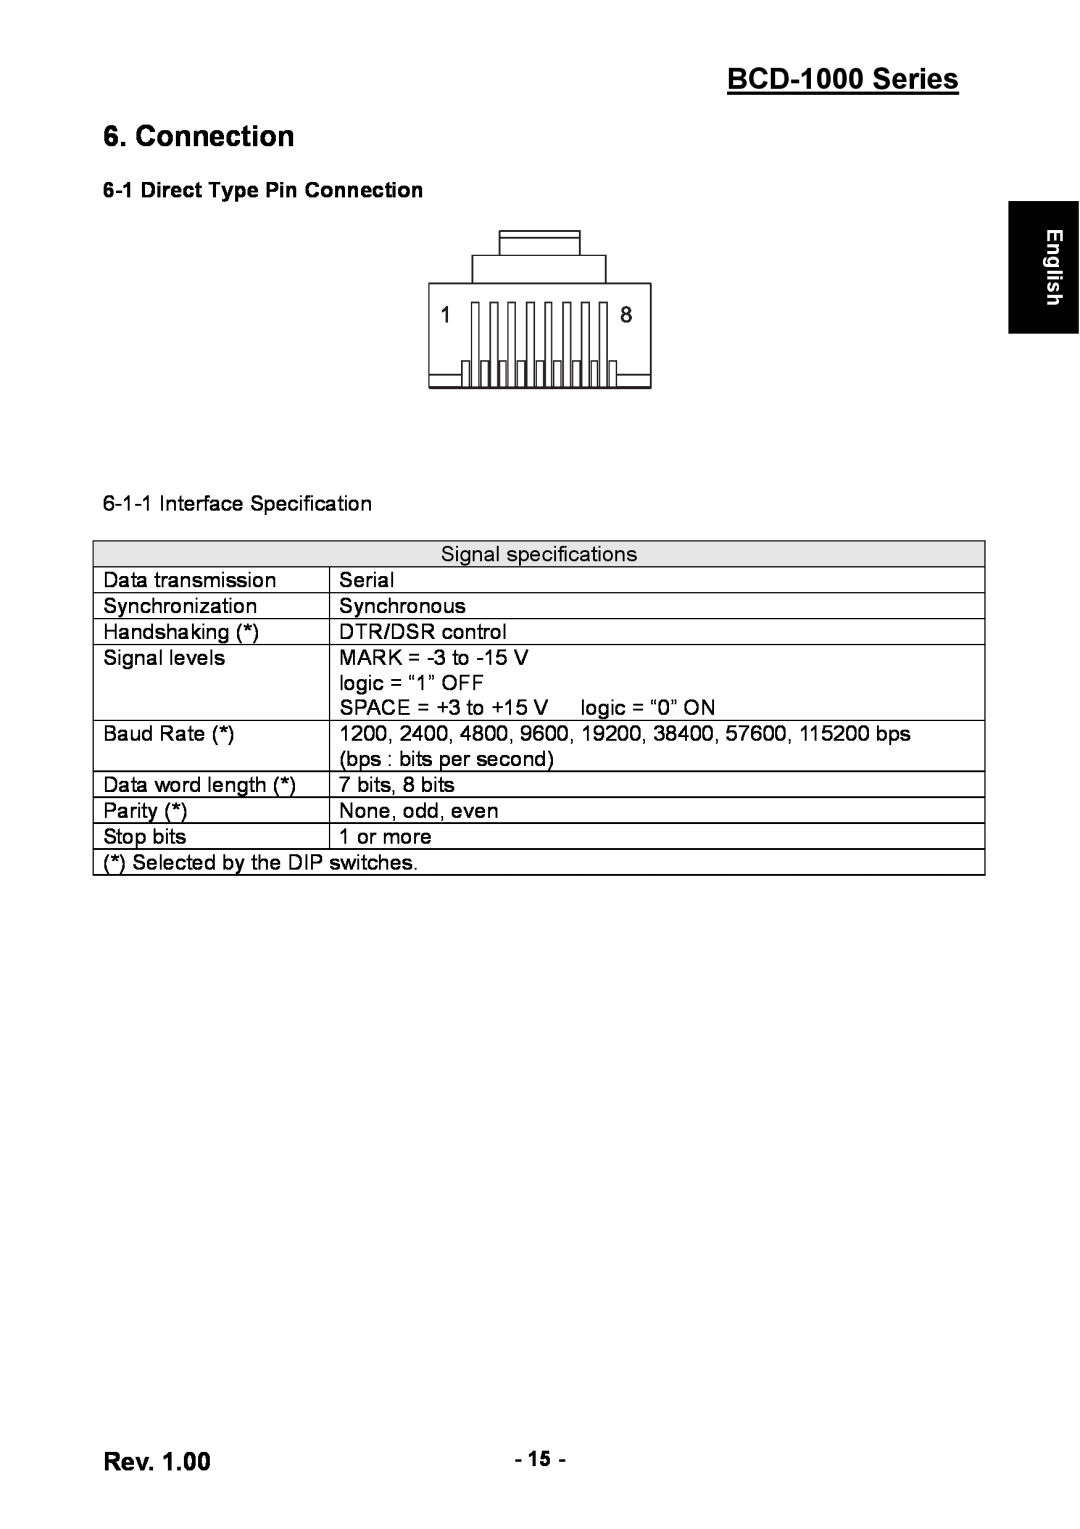 Samsung user manual BCD-1000 Series 6. Connection, Direct Type Pin Connection, English 